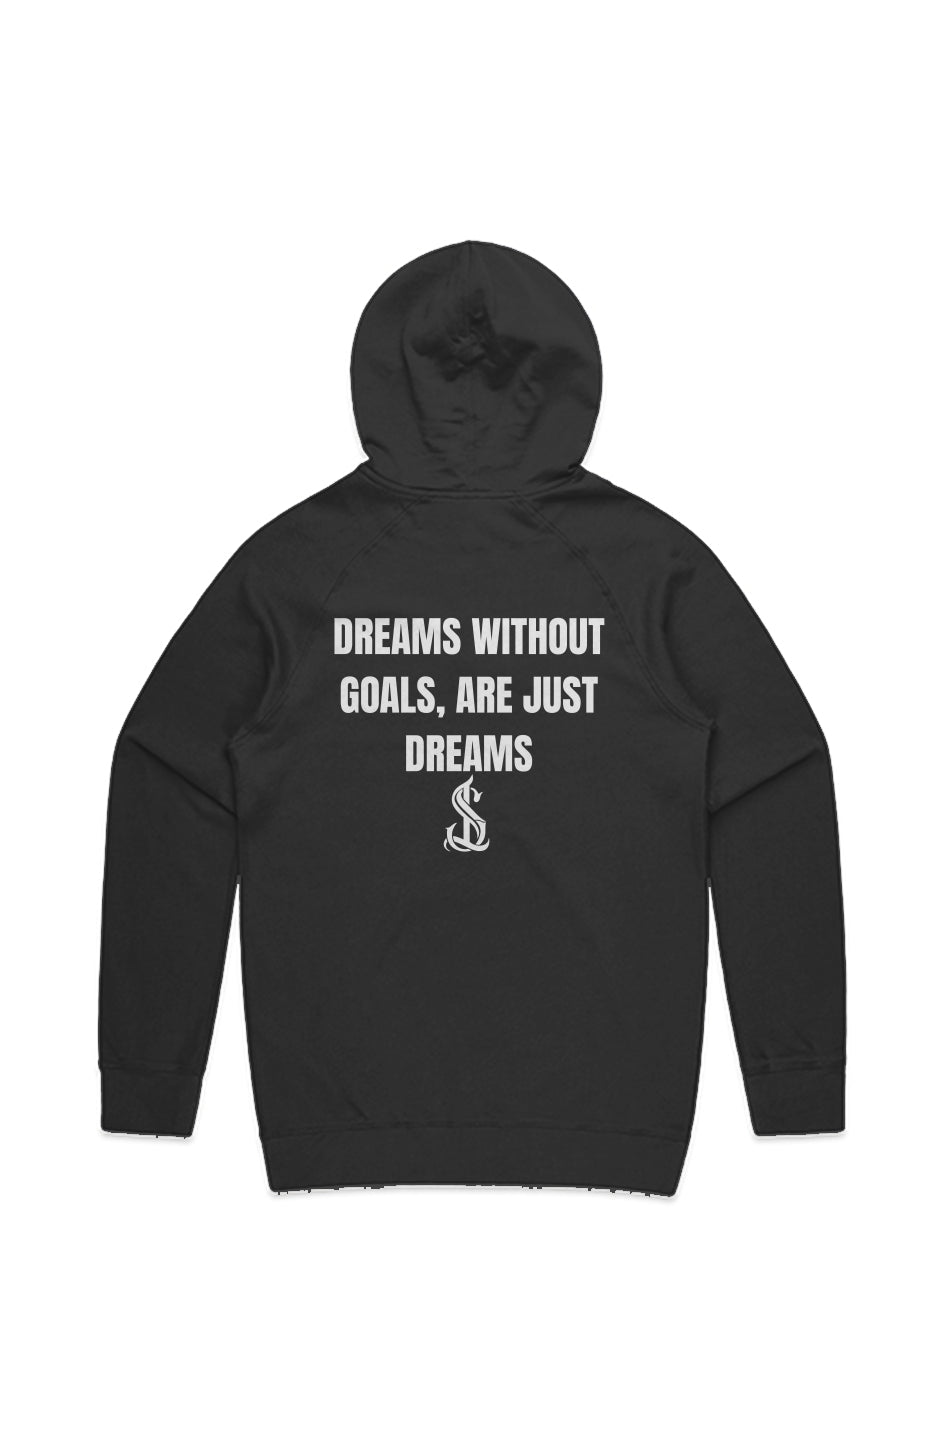 Dreams Without Goals Are Just Dreams